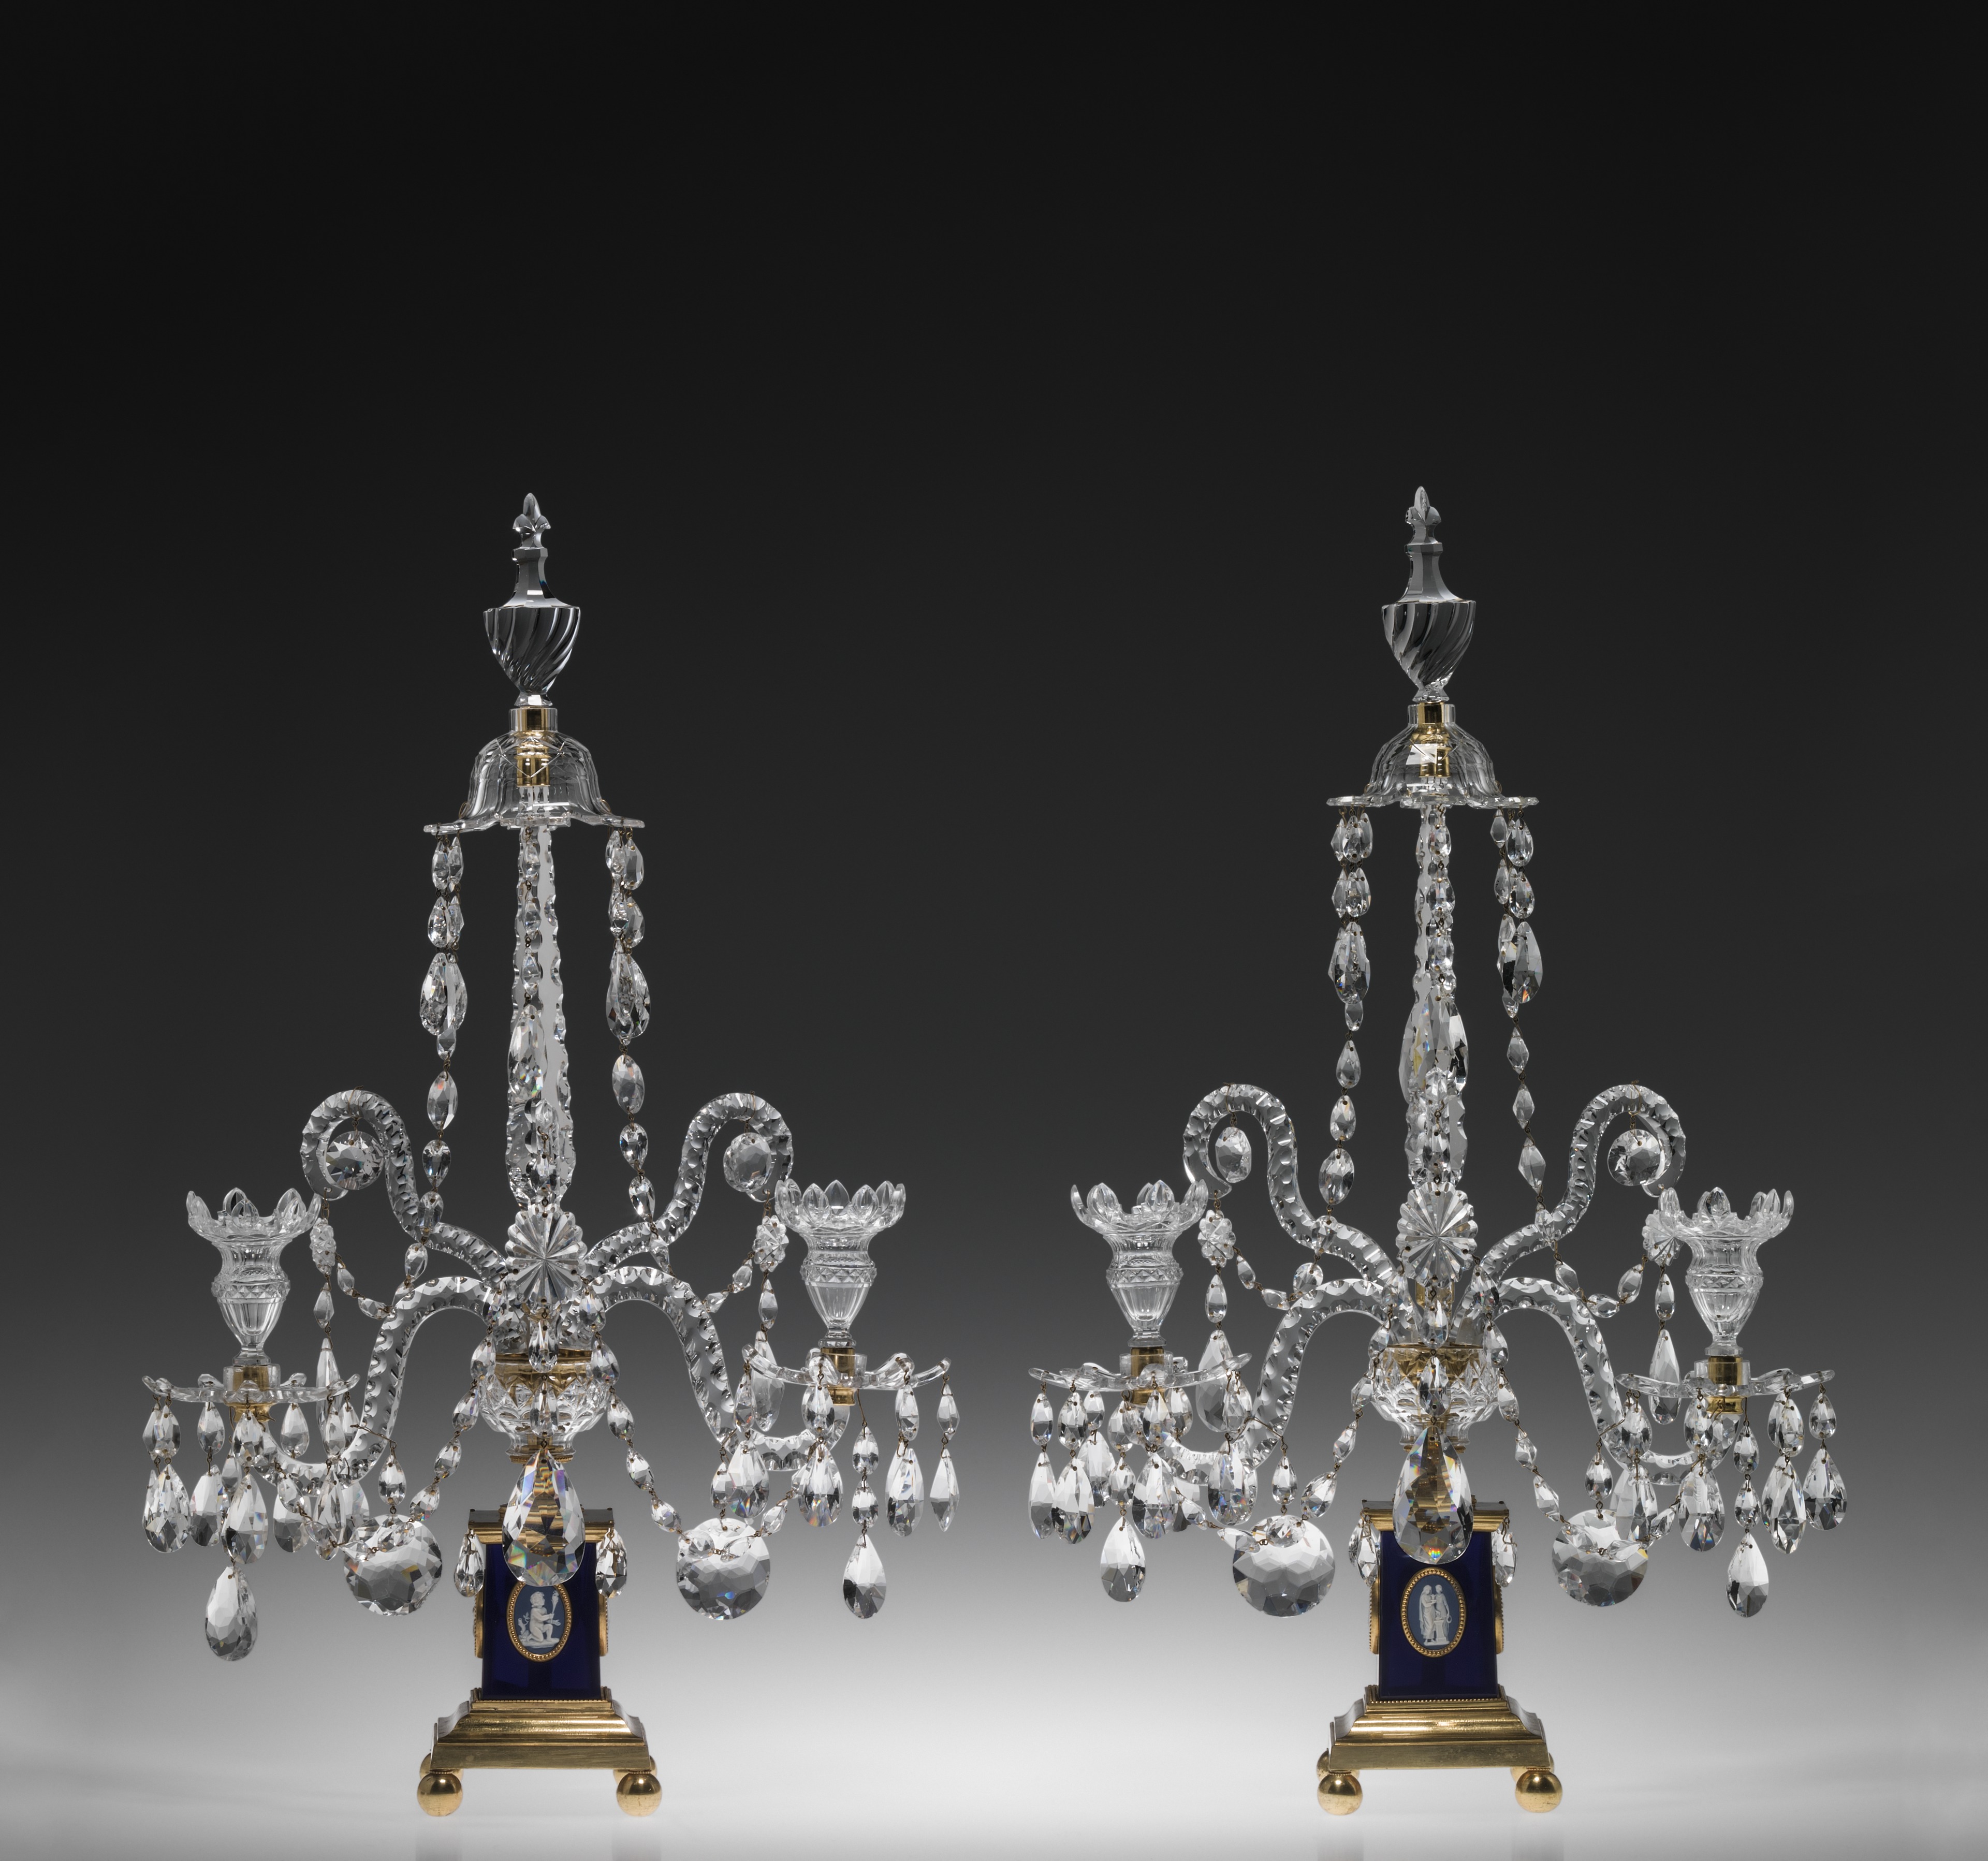 Pair of girandoles, tooled and cut lead glass; Credit: Collection of the Corning Museum of Glass, Corning, NY.